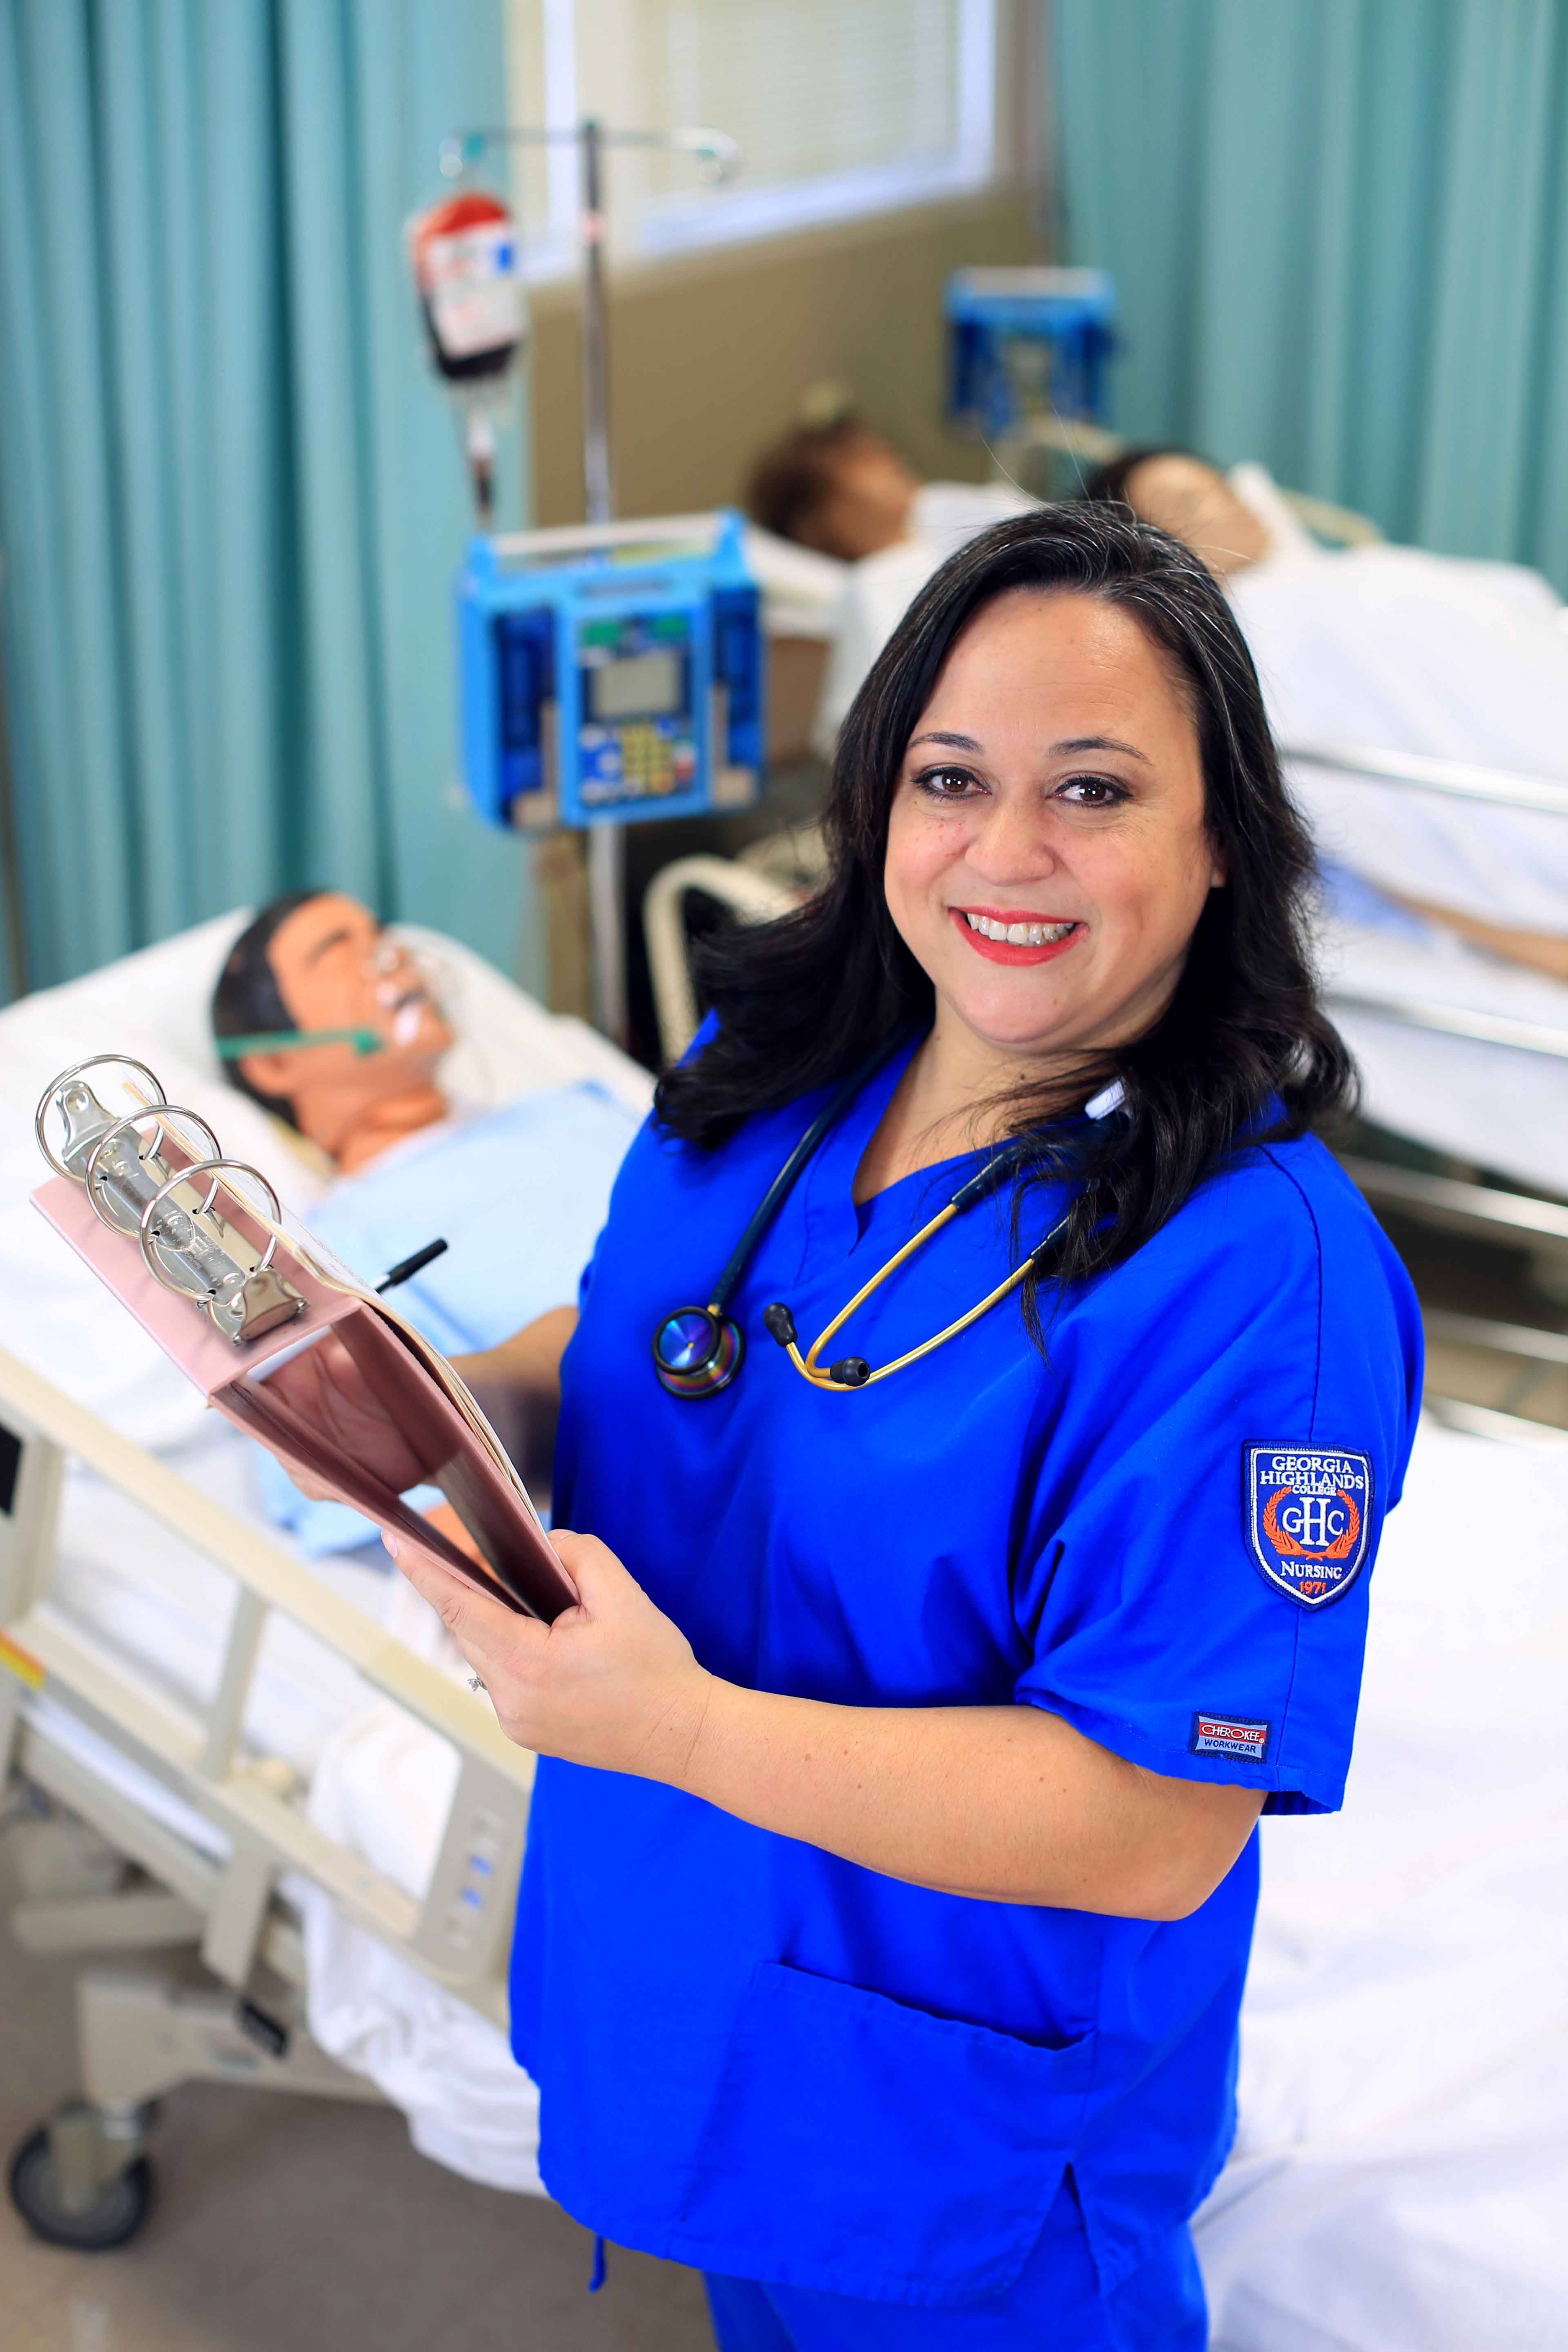 nursing student with clipboard